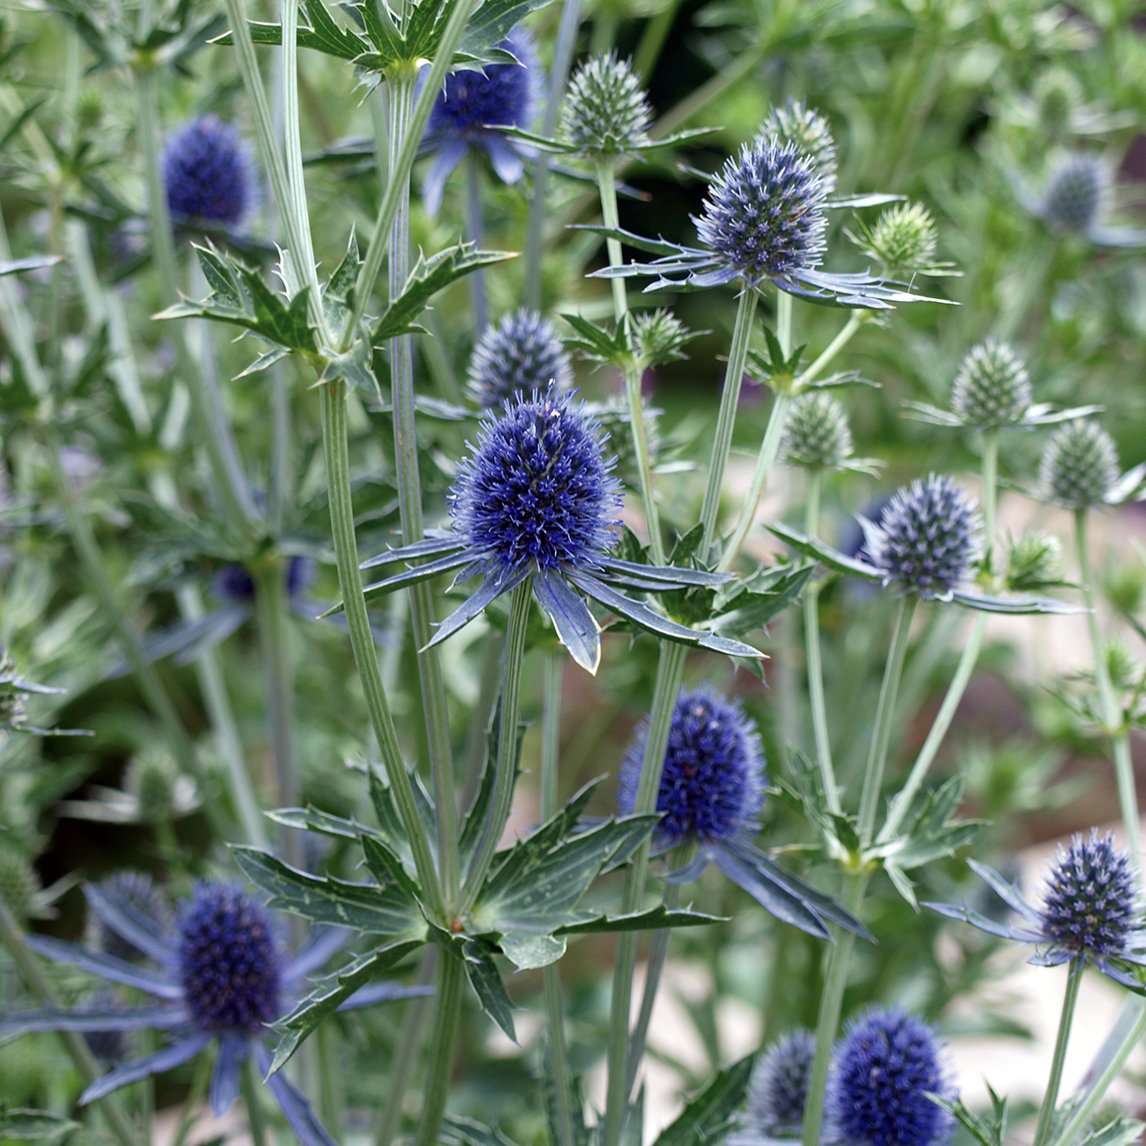 Image of Sea holly flower